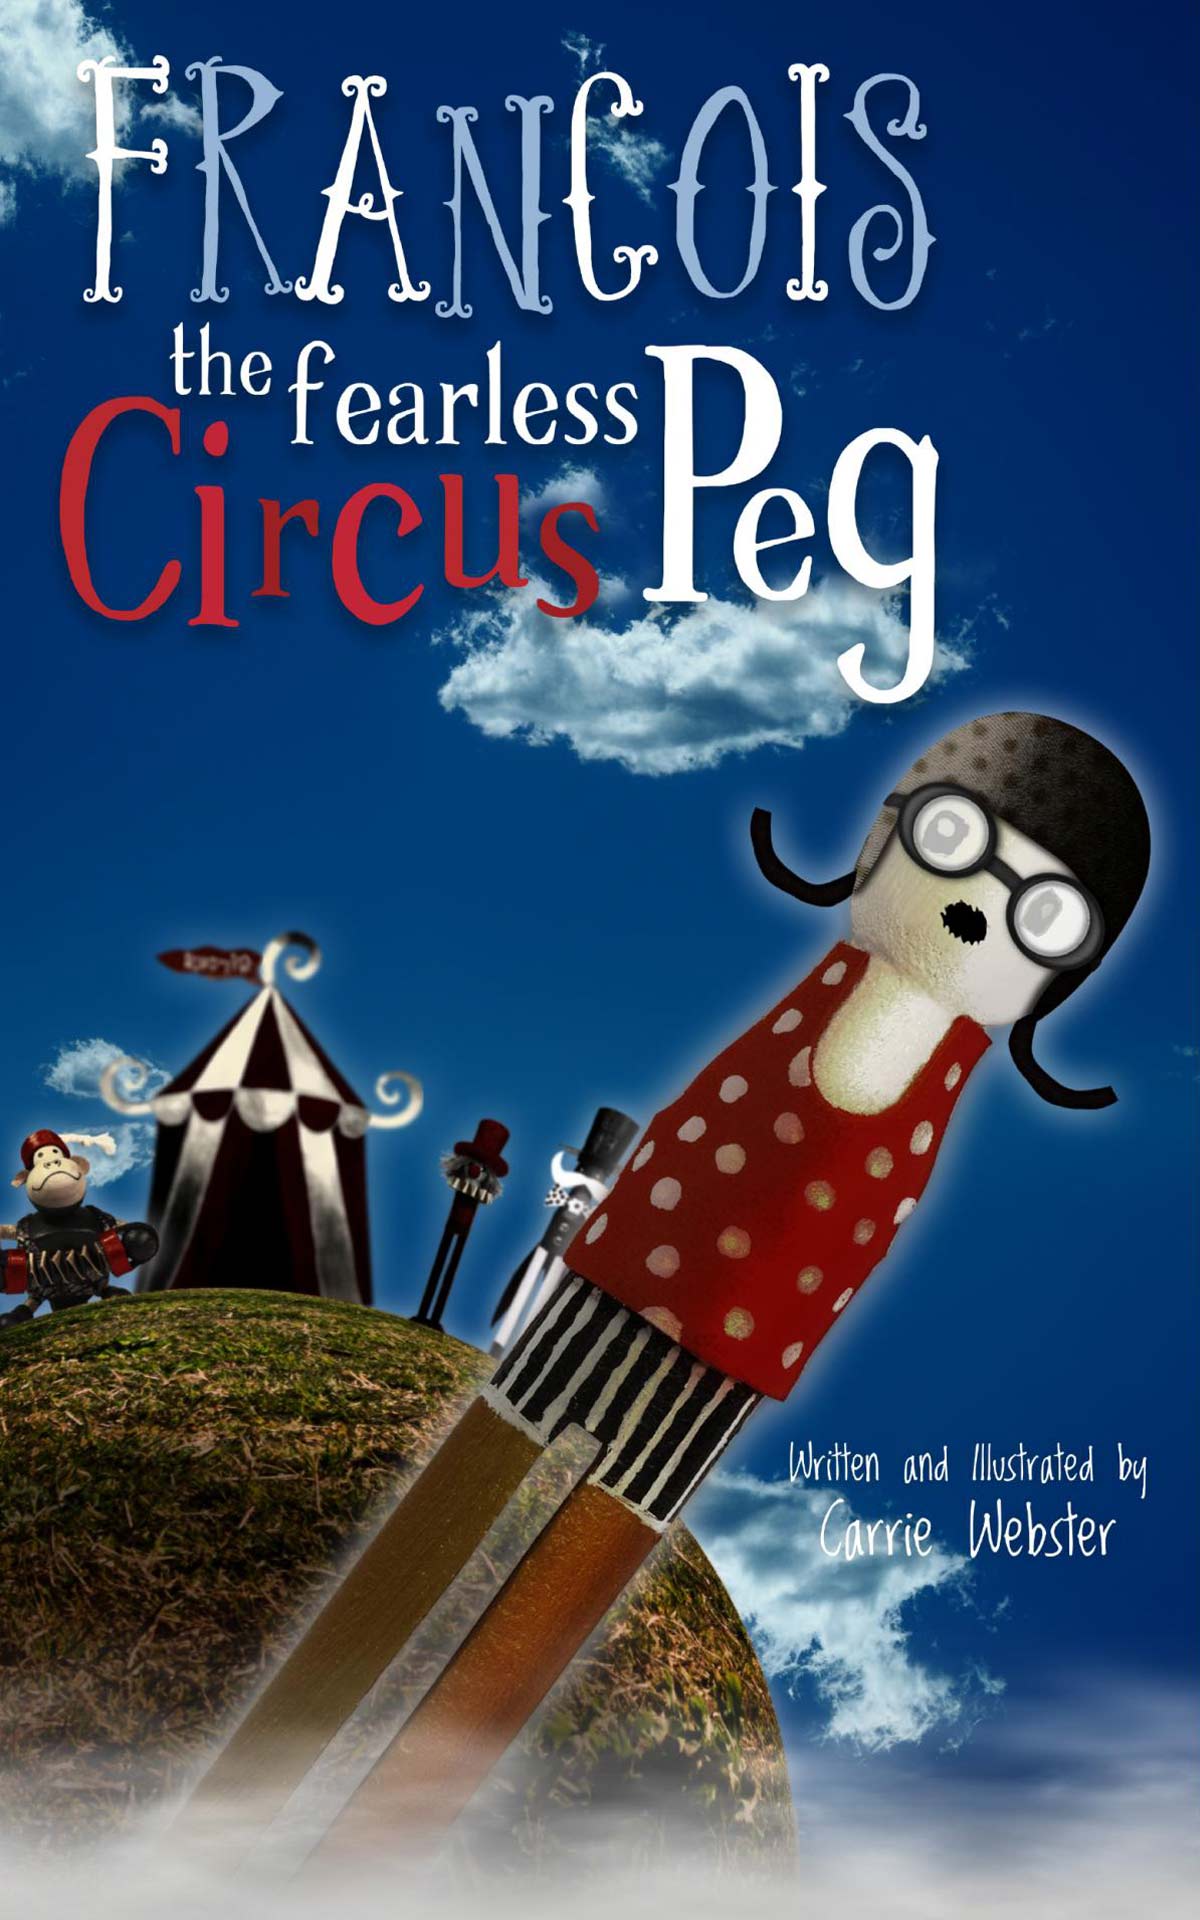 FREE: Francois the Fearless Circus Peg by Carrie Webster